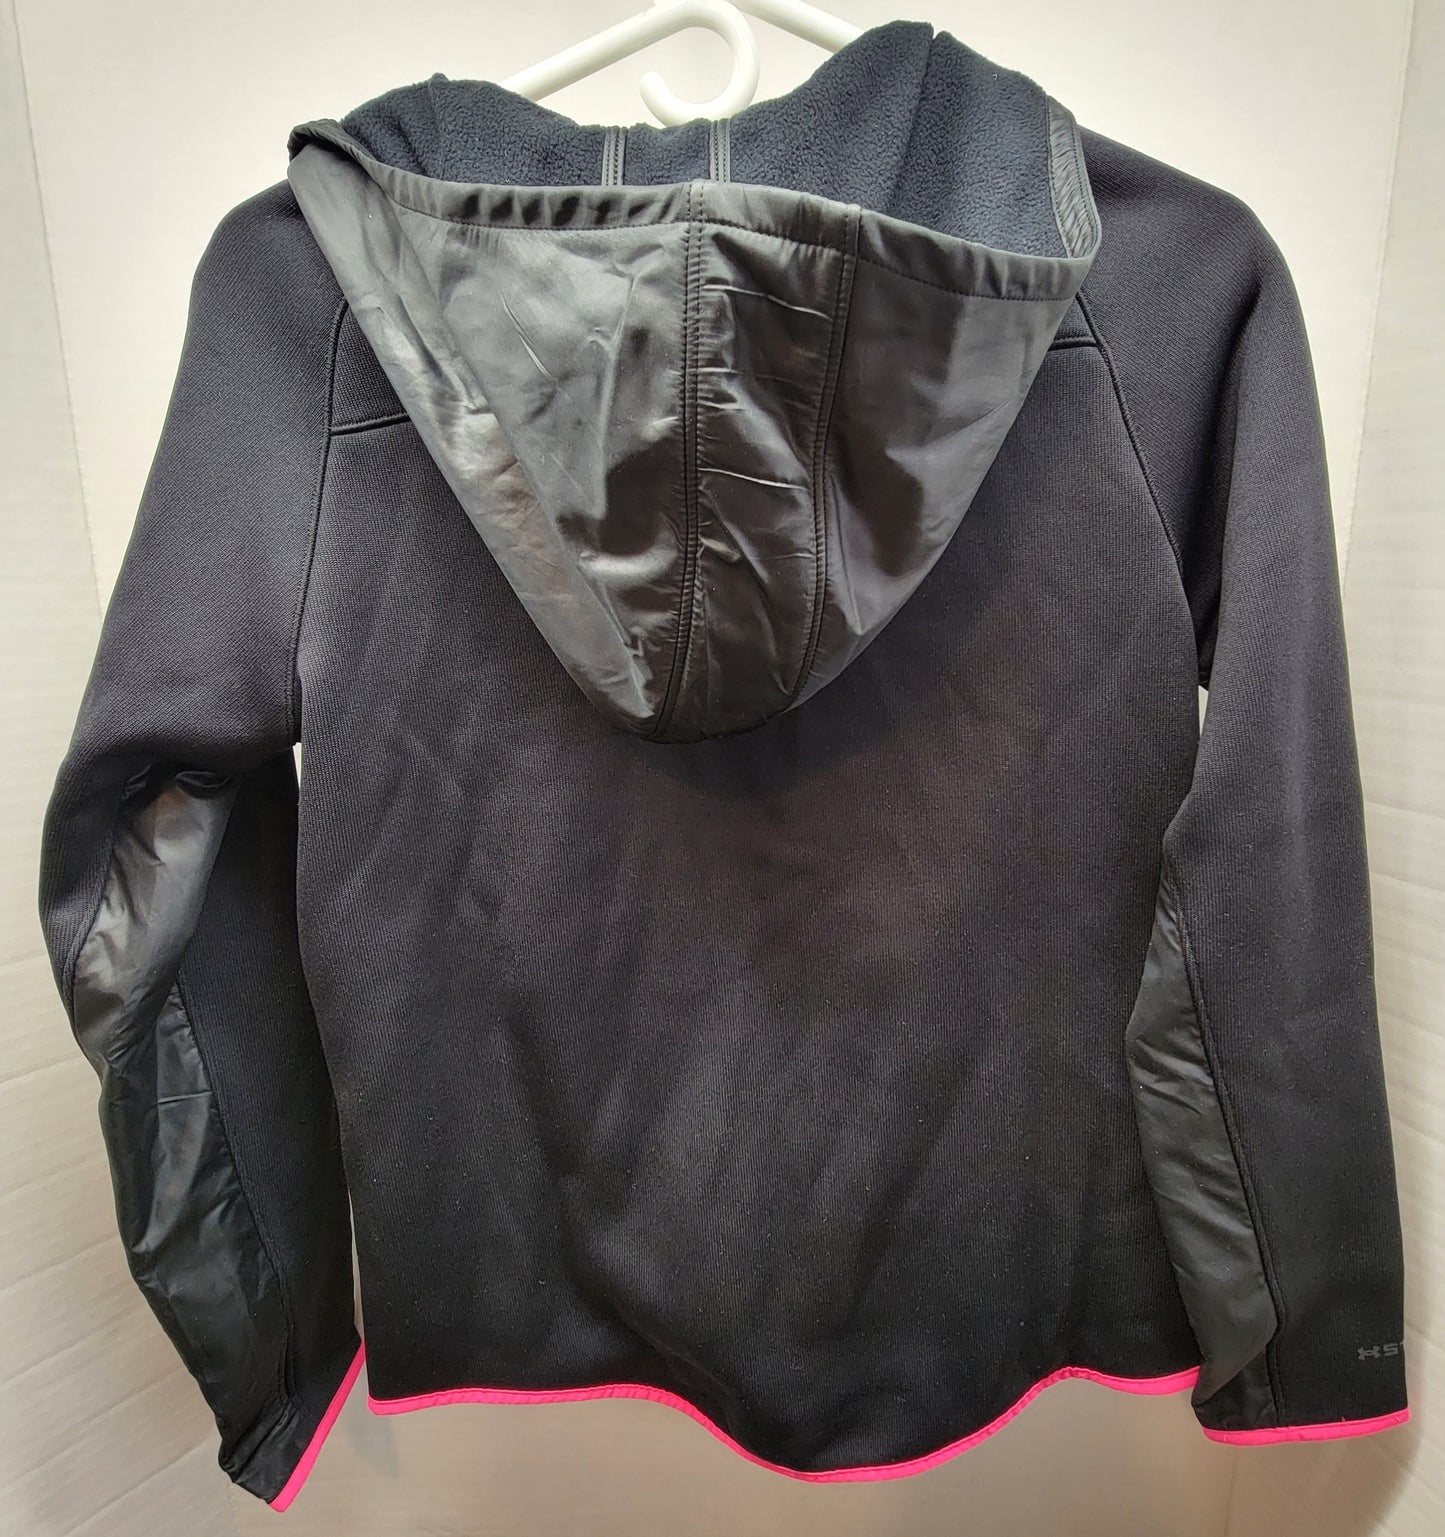 Under Armour Girls Size YLG Storm Black & Pink Jacket Retail $99.99